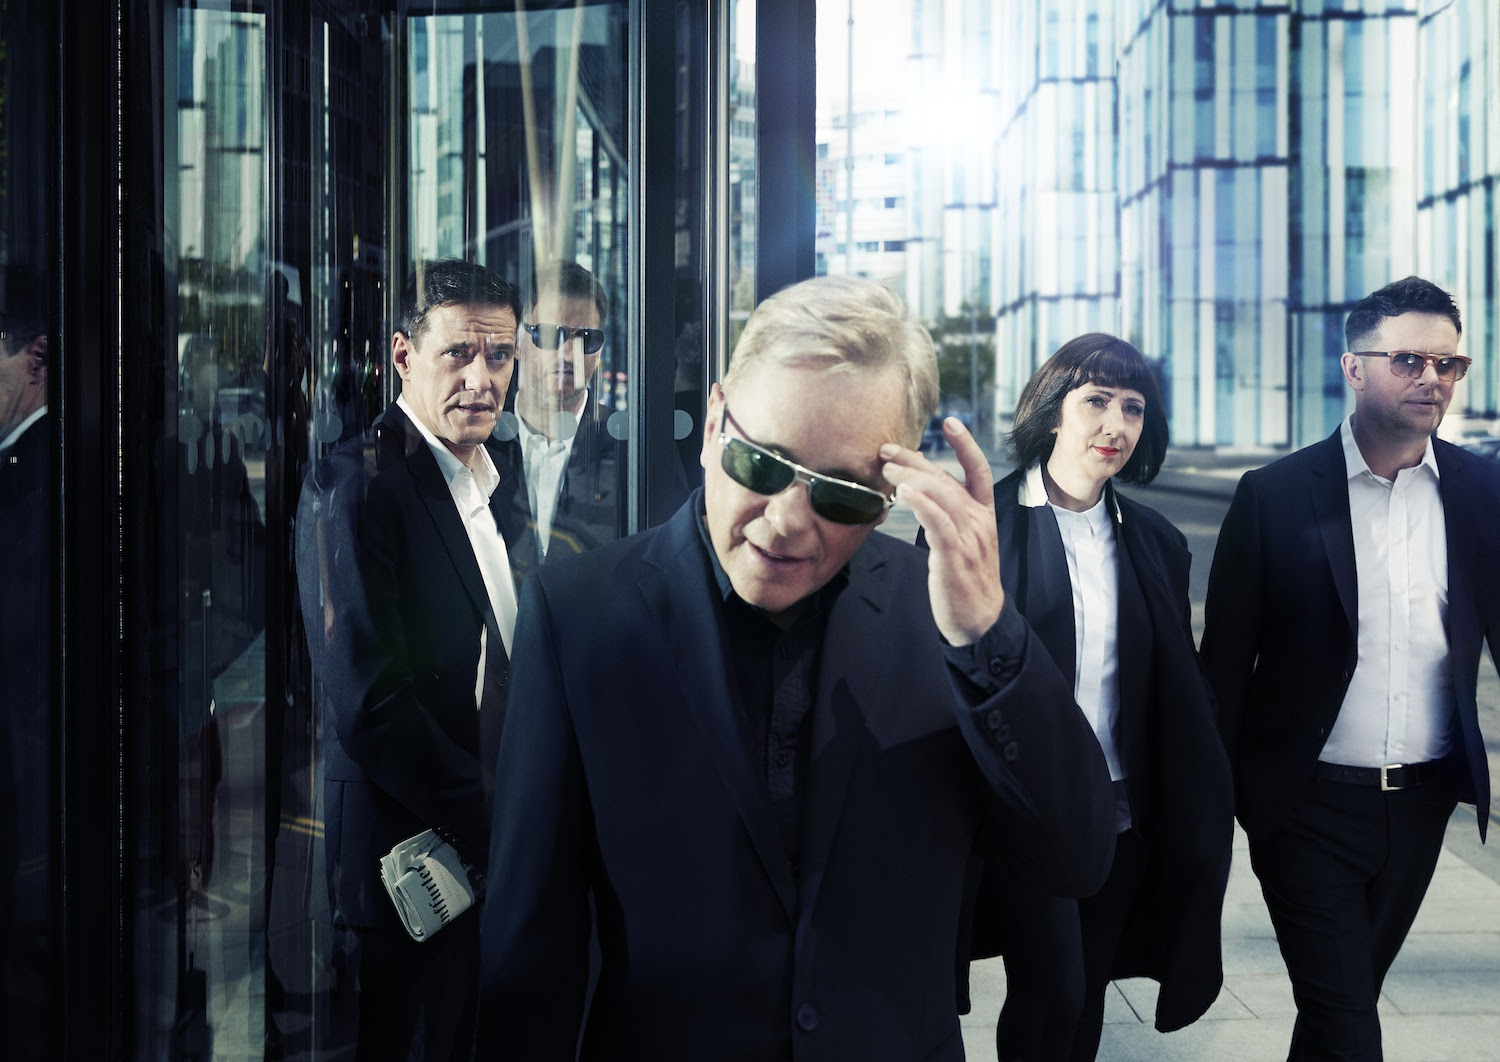 New Order announce North American Tour dates